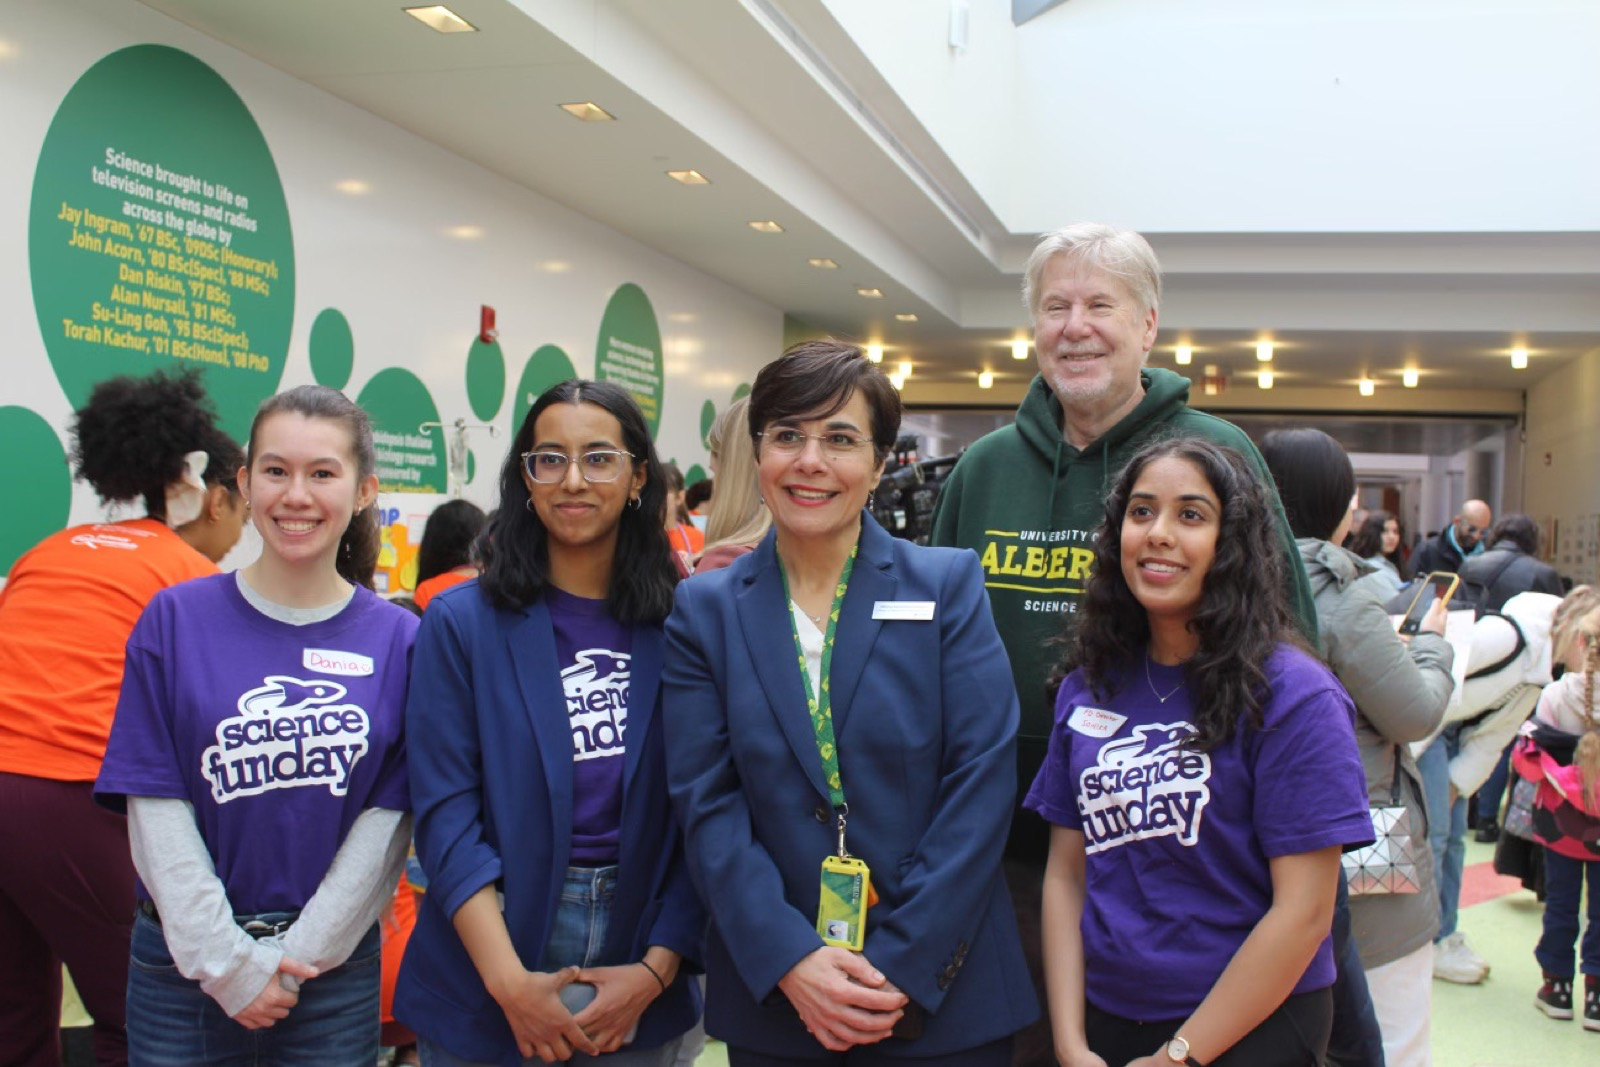 Science FUNdamentals vice-president Dania Al-Rimawi, president Bushra Anjum, and FUNday director Sonika Khurana (left to right) take a photo with Matina Kalcounis-Rueppell, dean of the College of Natural and Applied Sciences, and Frederick West, dean of the Faculty of Science.